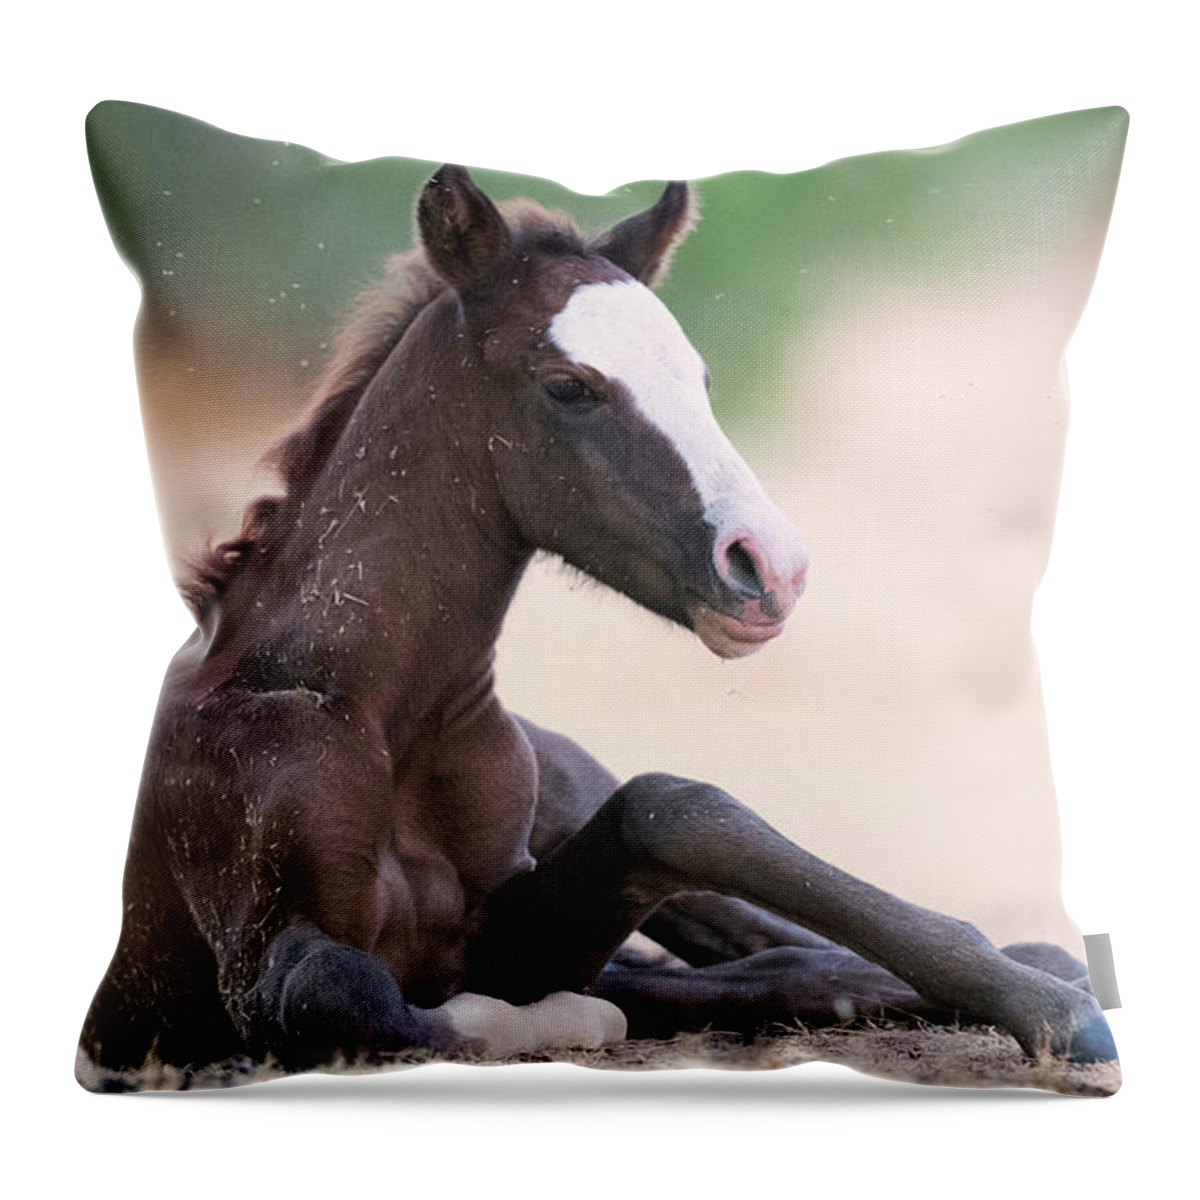 Cute Foal Throw Pillow featuring the photograph Cactus Fire by Shannon Hastings